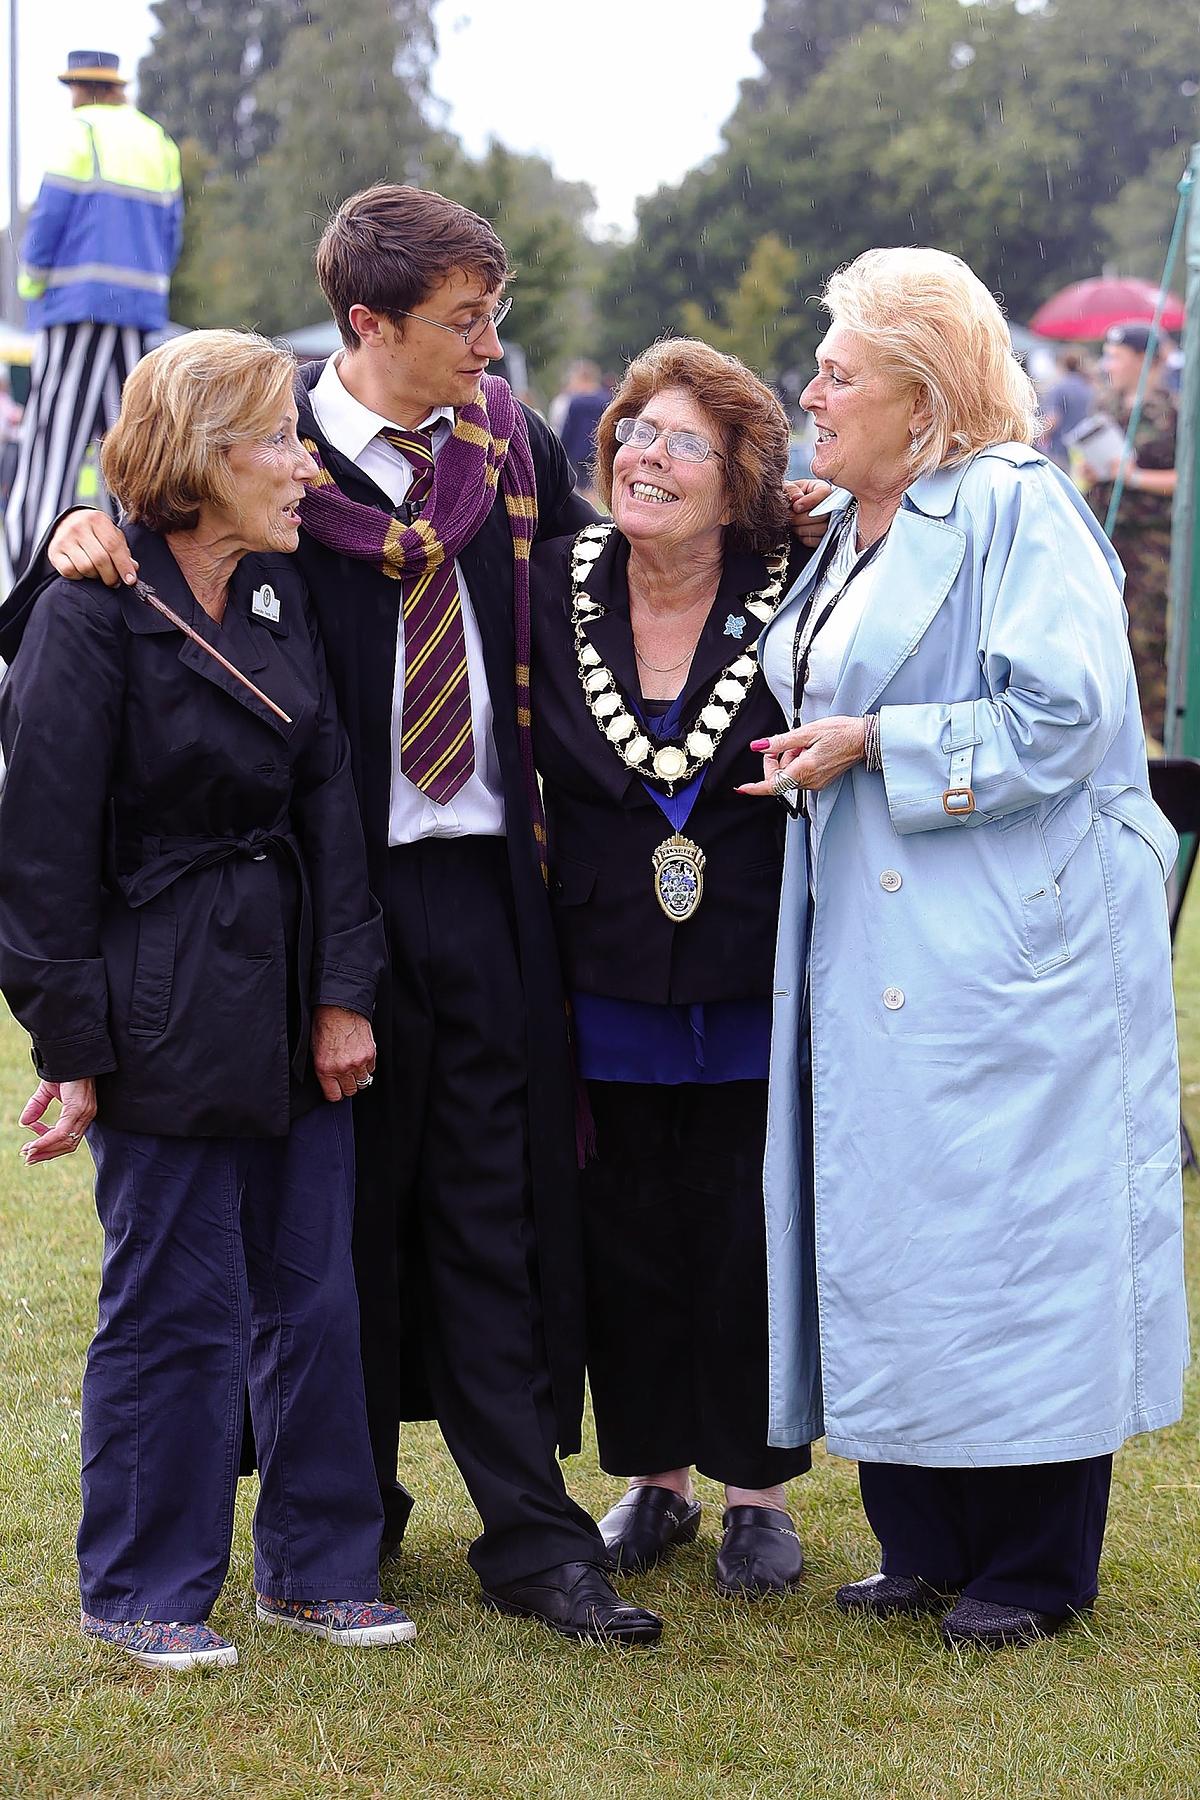 Elstree and Borehamwood's Annual Civic Festival Families Day 2014